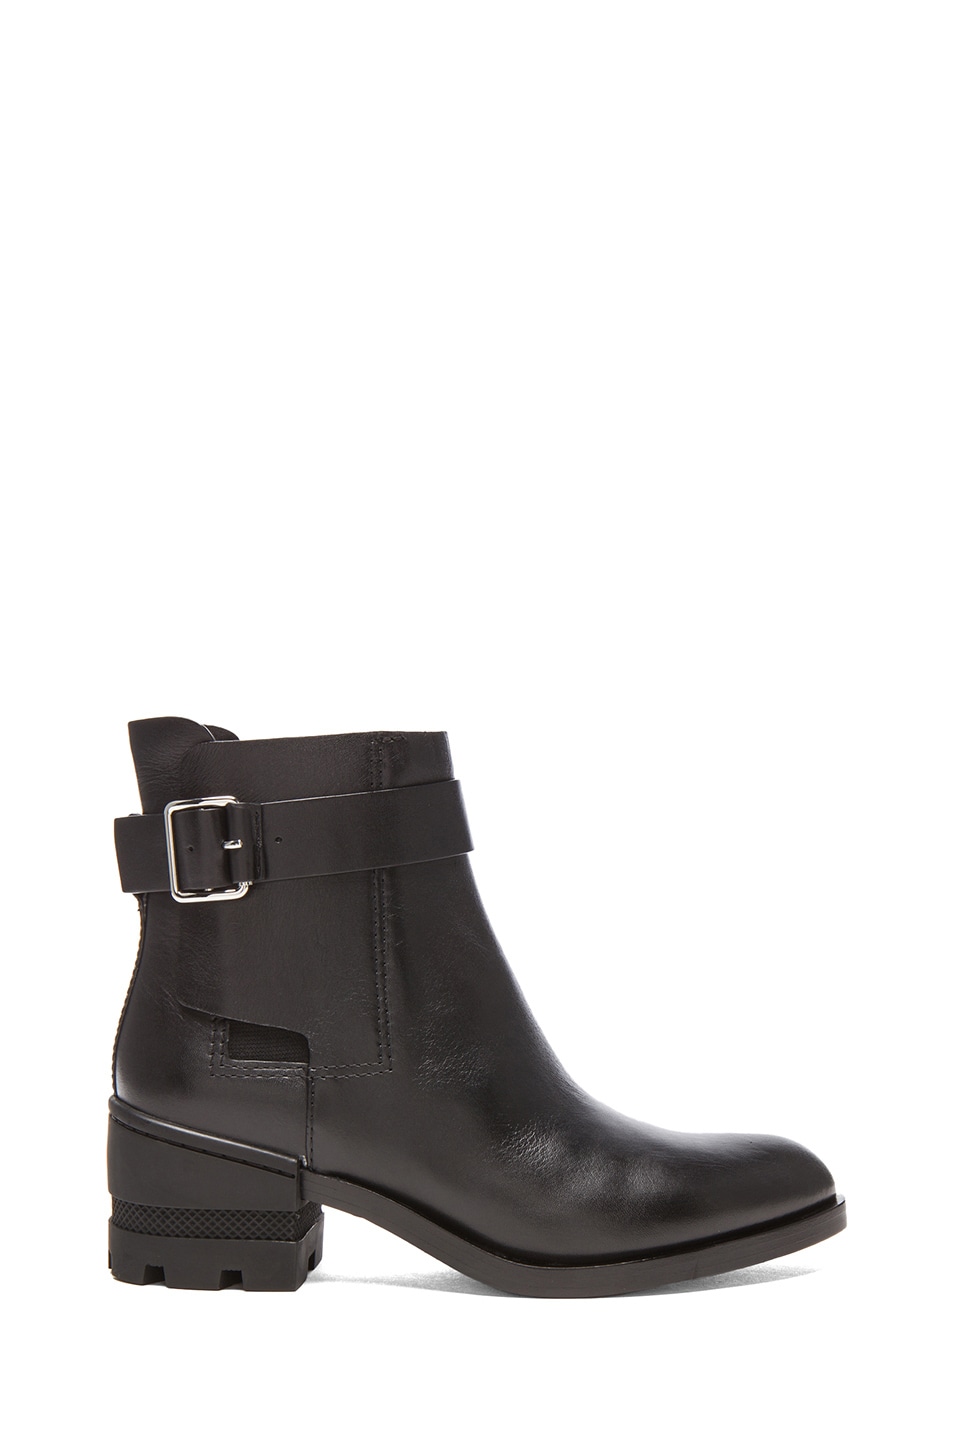 Image 1 of Alexander Wang Martine Leather Ankle Boots in Black